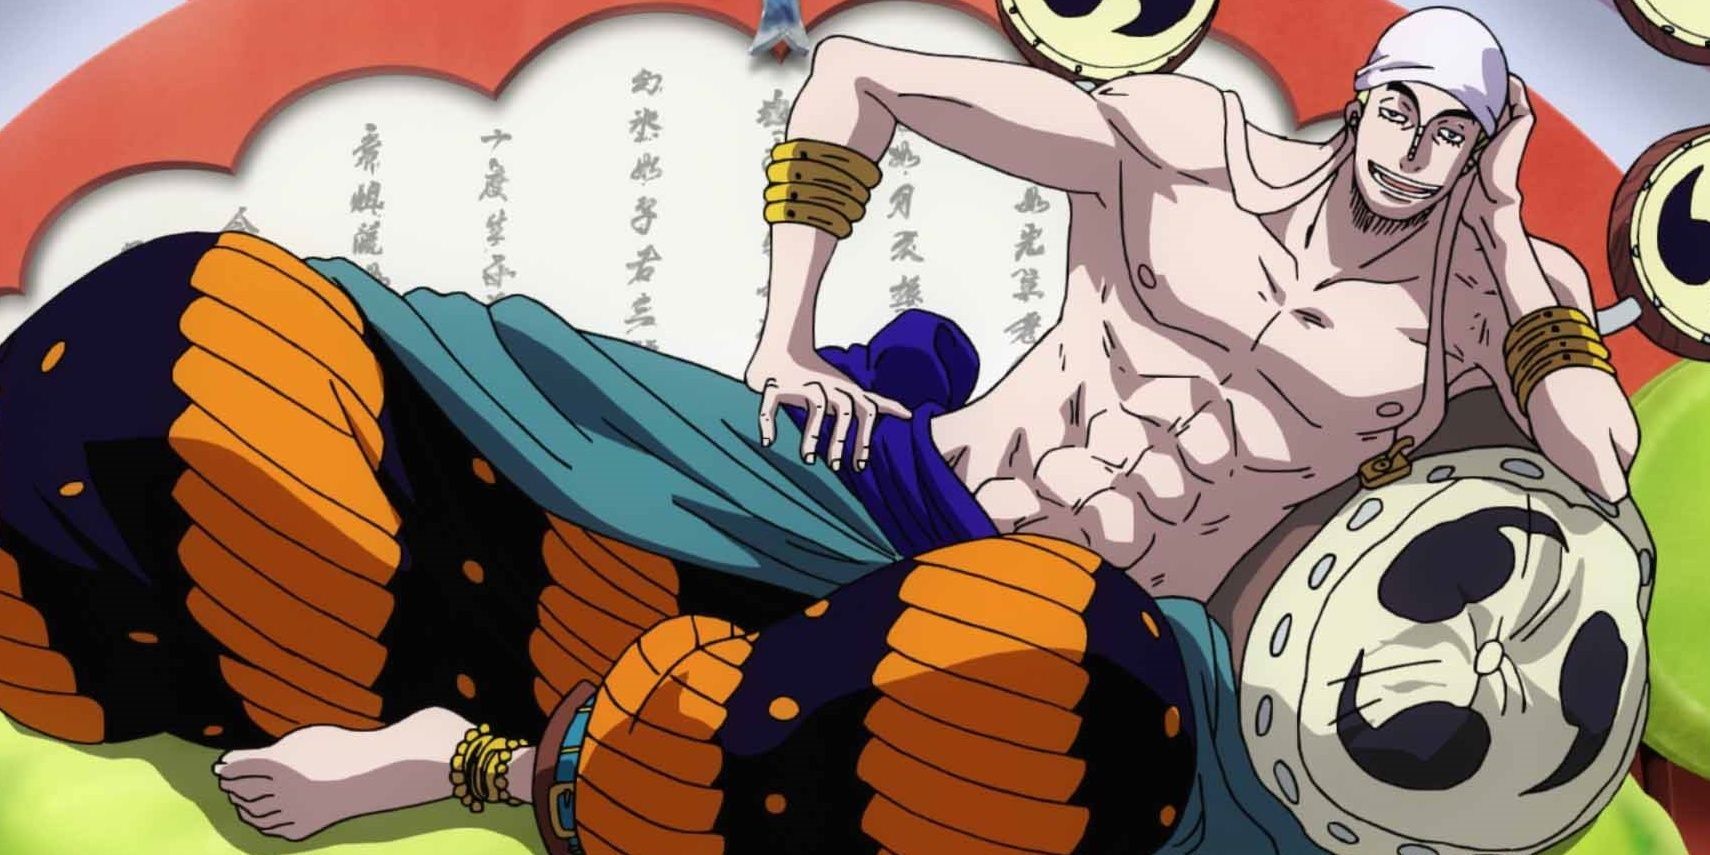 one piece - What is that thing behind Enel's back? - Anime & Manga